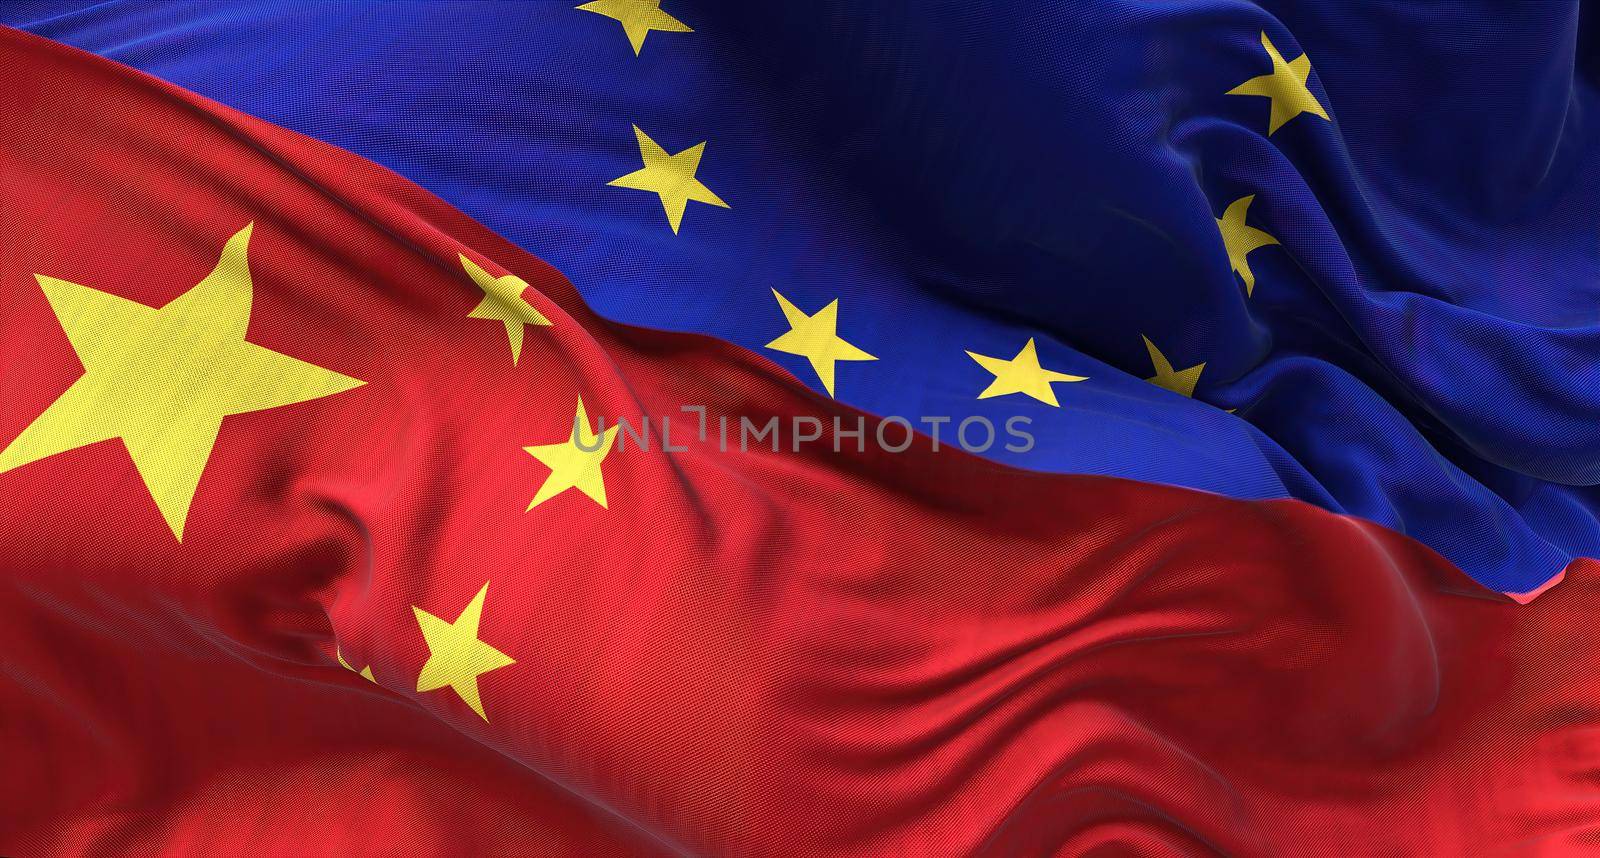 The flags of China and the European Union waving. International relations and diplomacy.